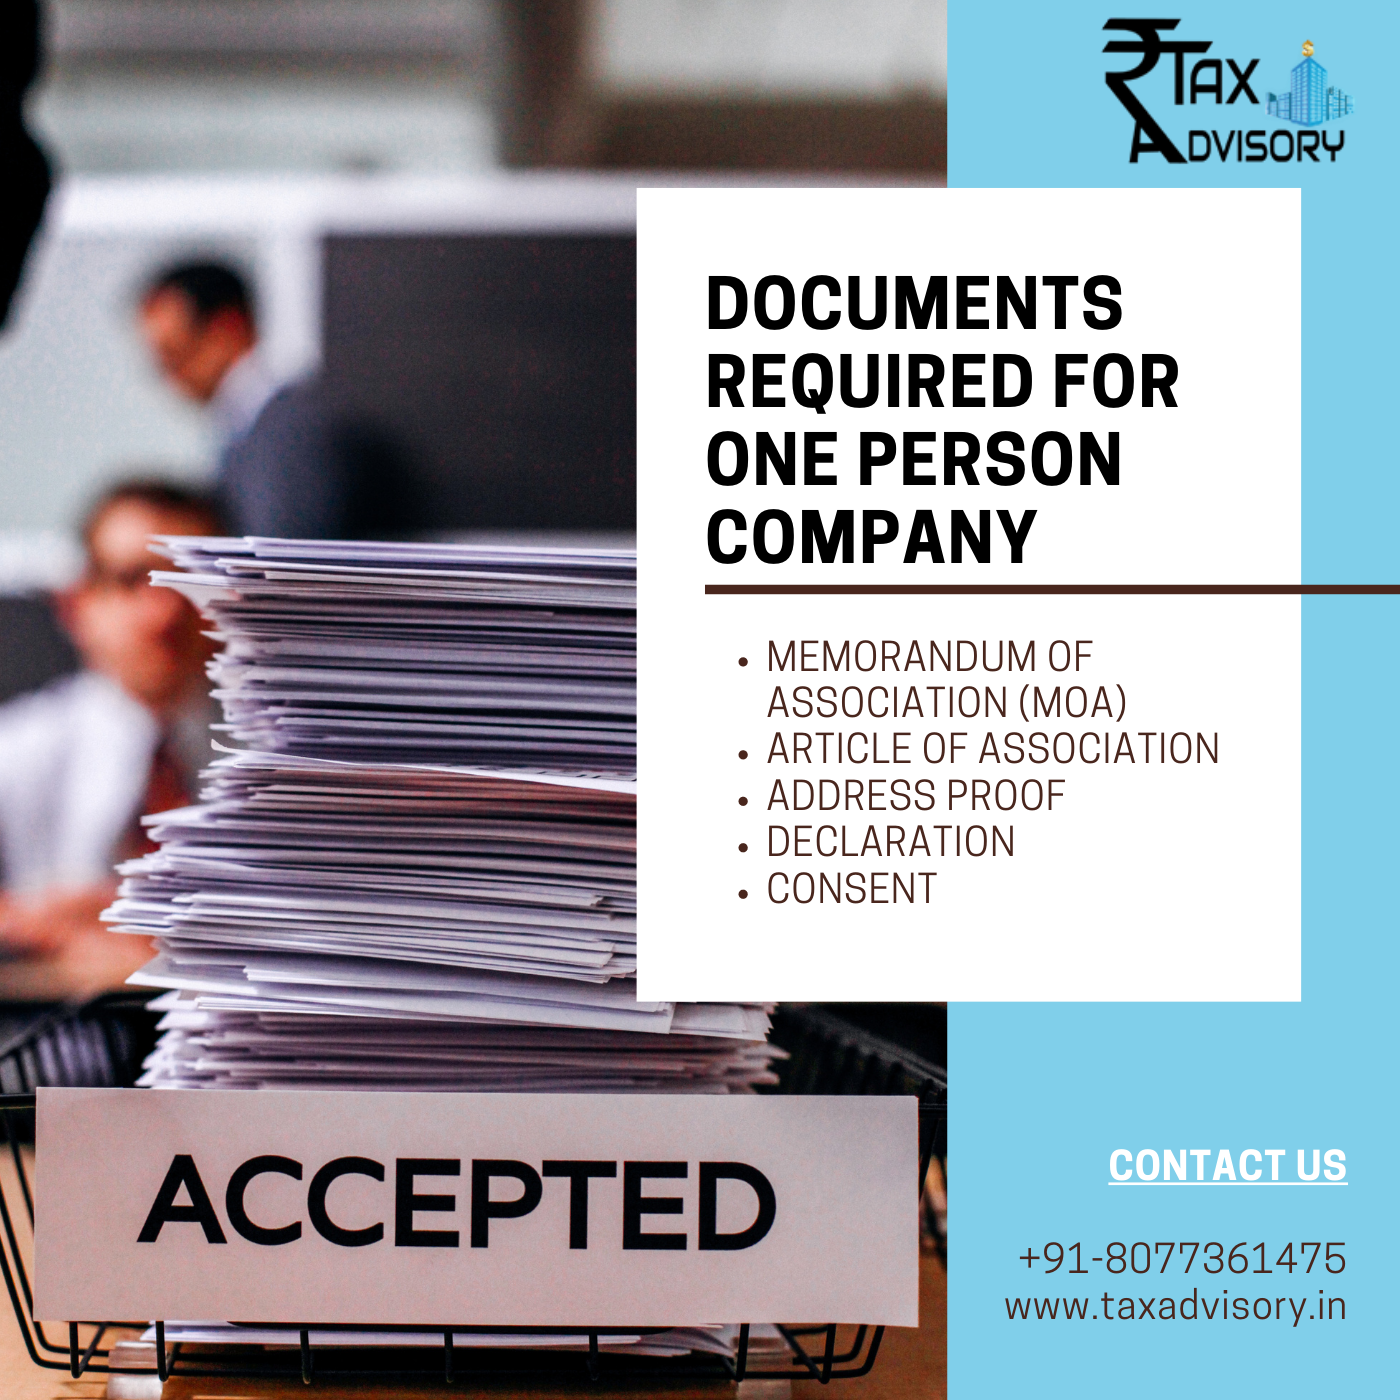 Documents required for opc